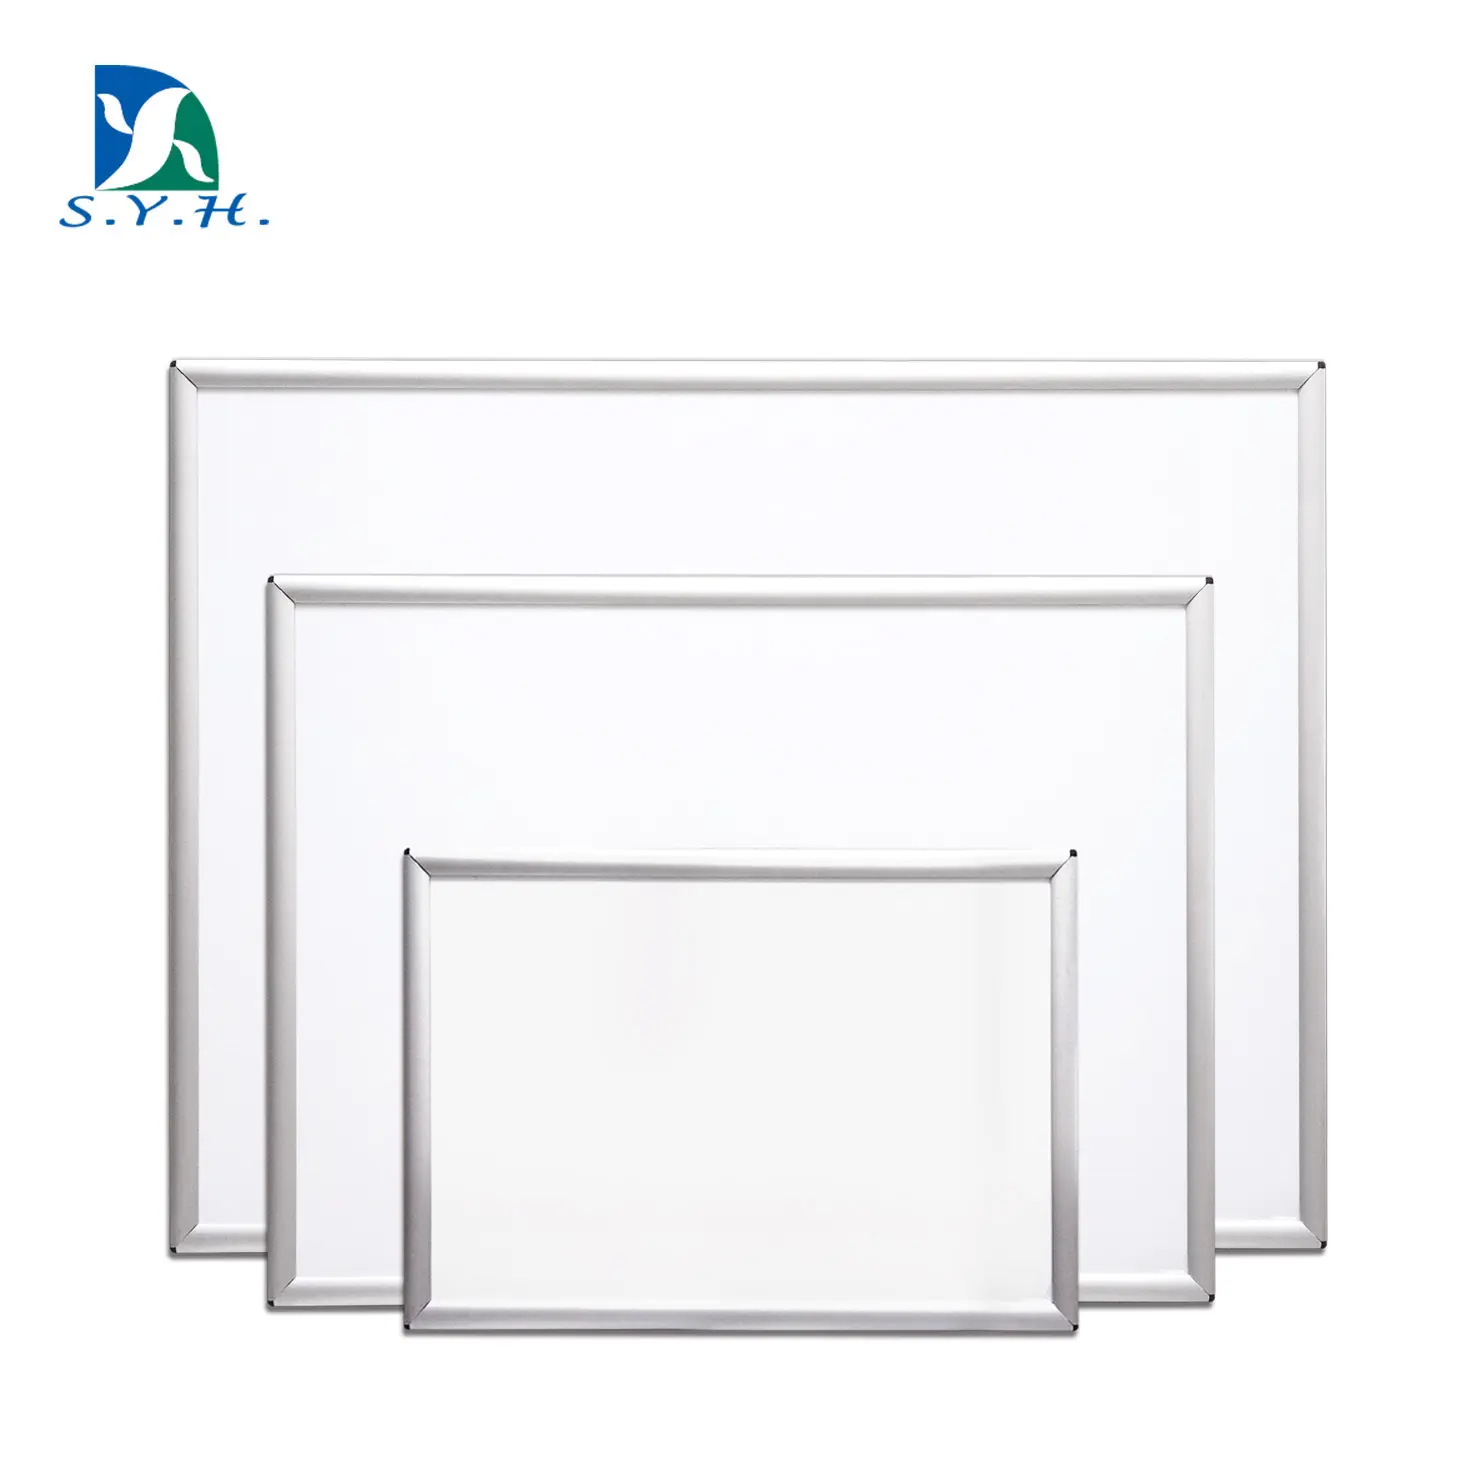 Elegant aluminum frame for whiteboard with small protect corner dry erase board for school home office